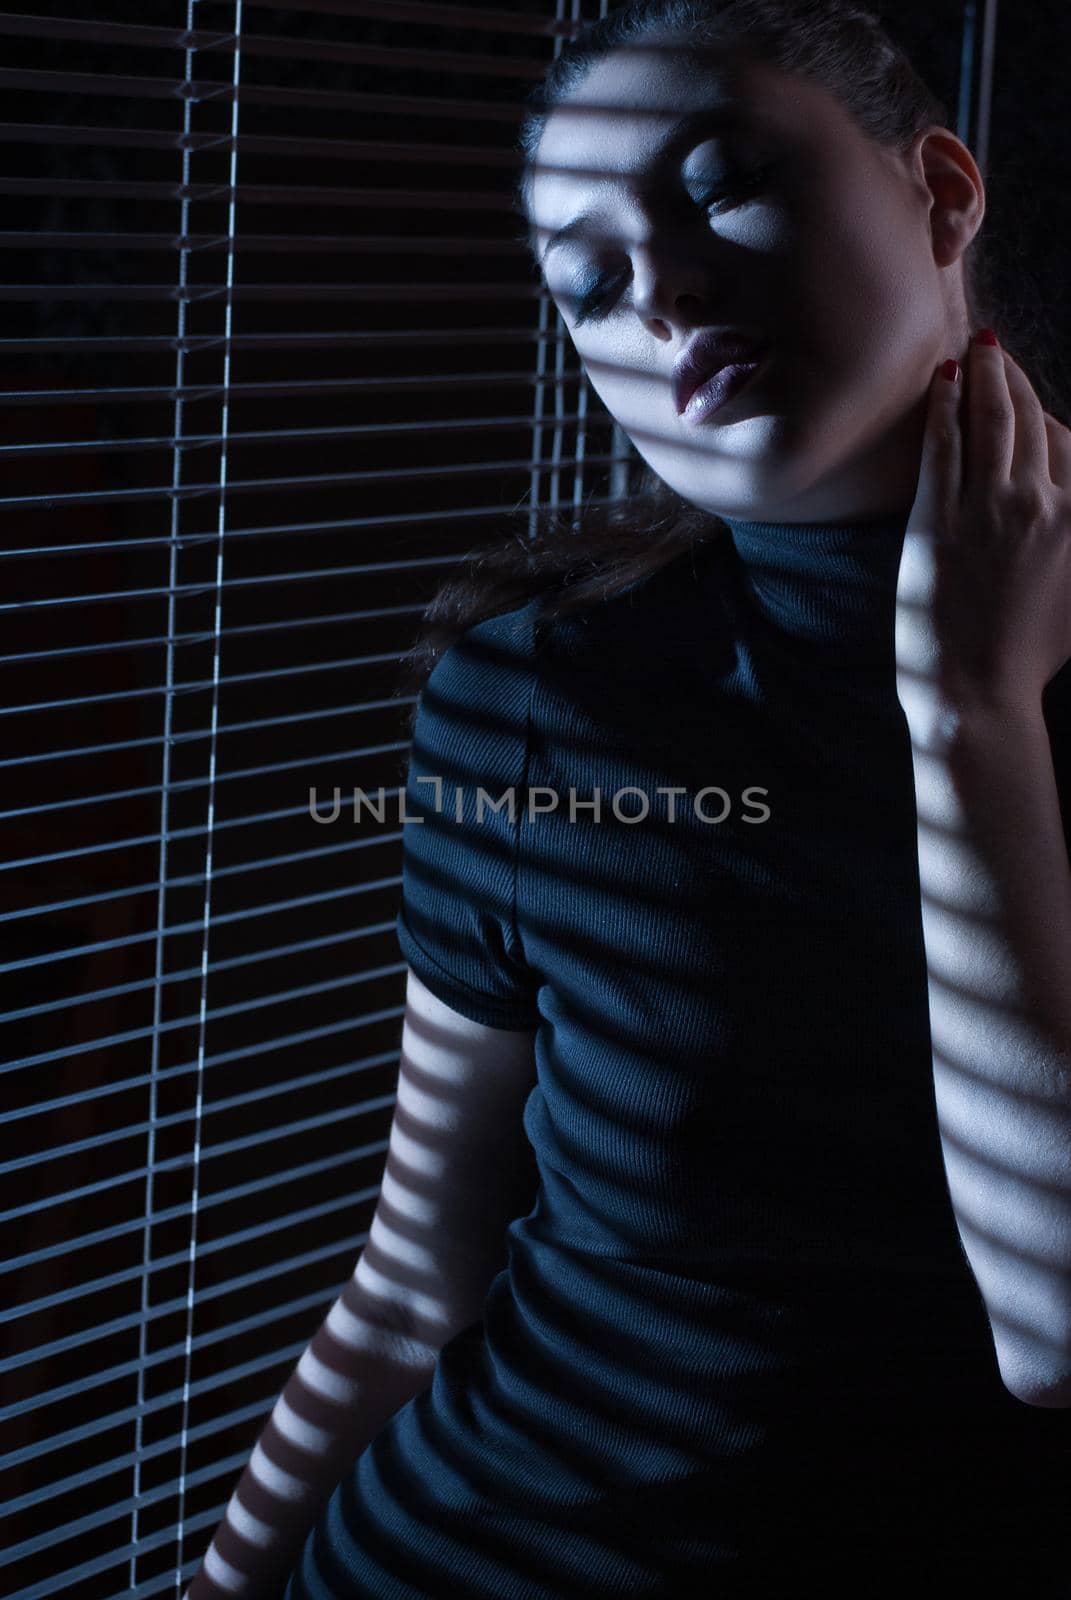 Sexy woman in black dress with jalousie looking through the window with jalousie